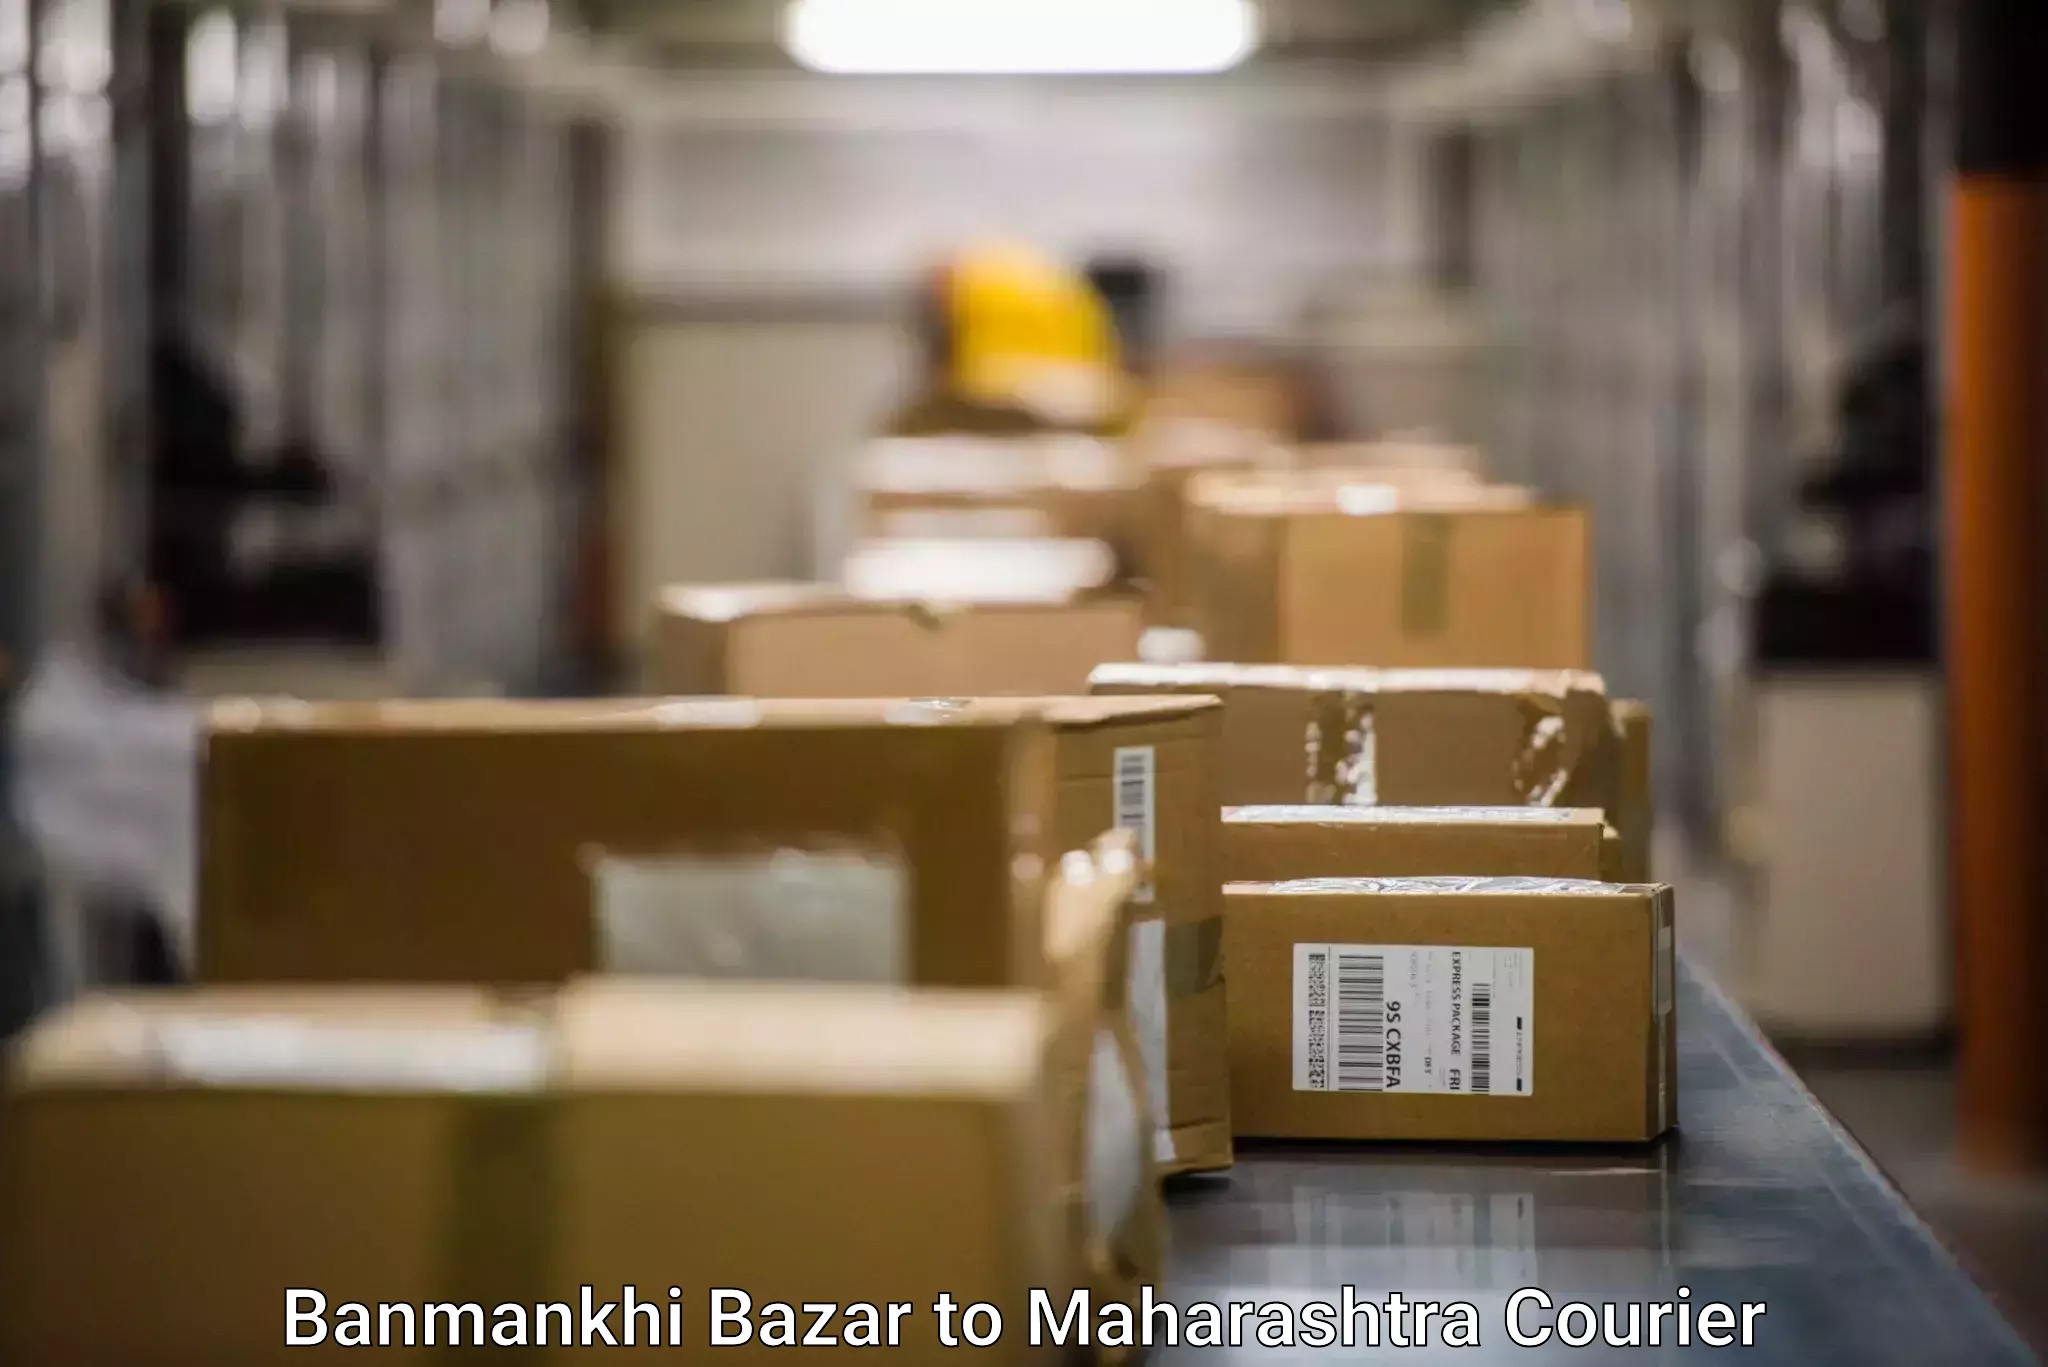 Same-day delivery solutions Banmankhi Bazar to Maharashtra